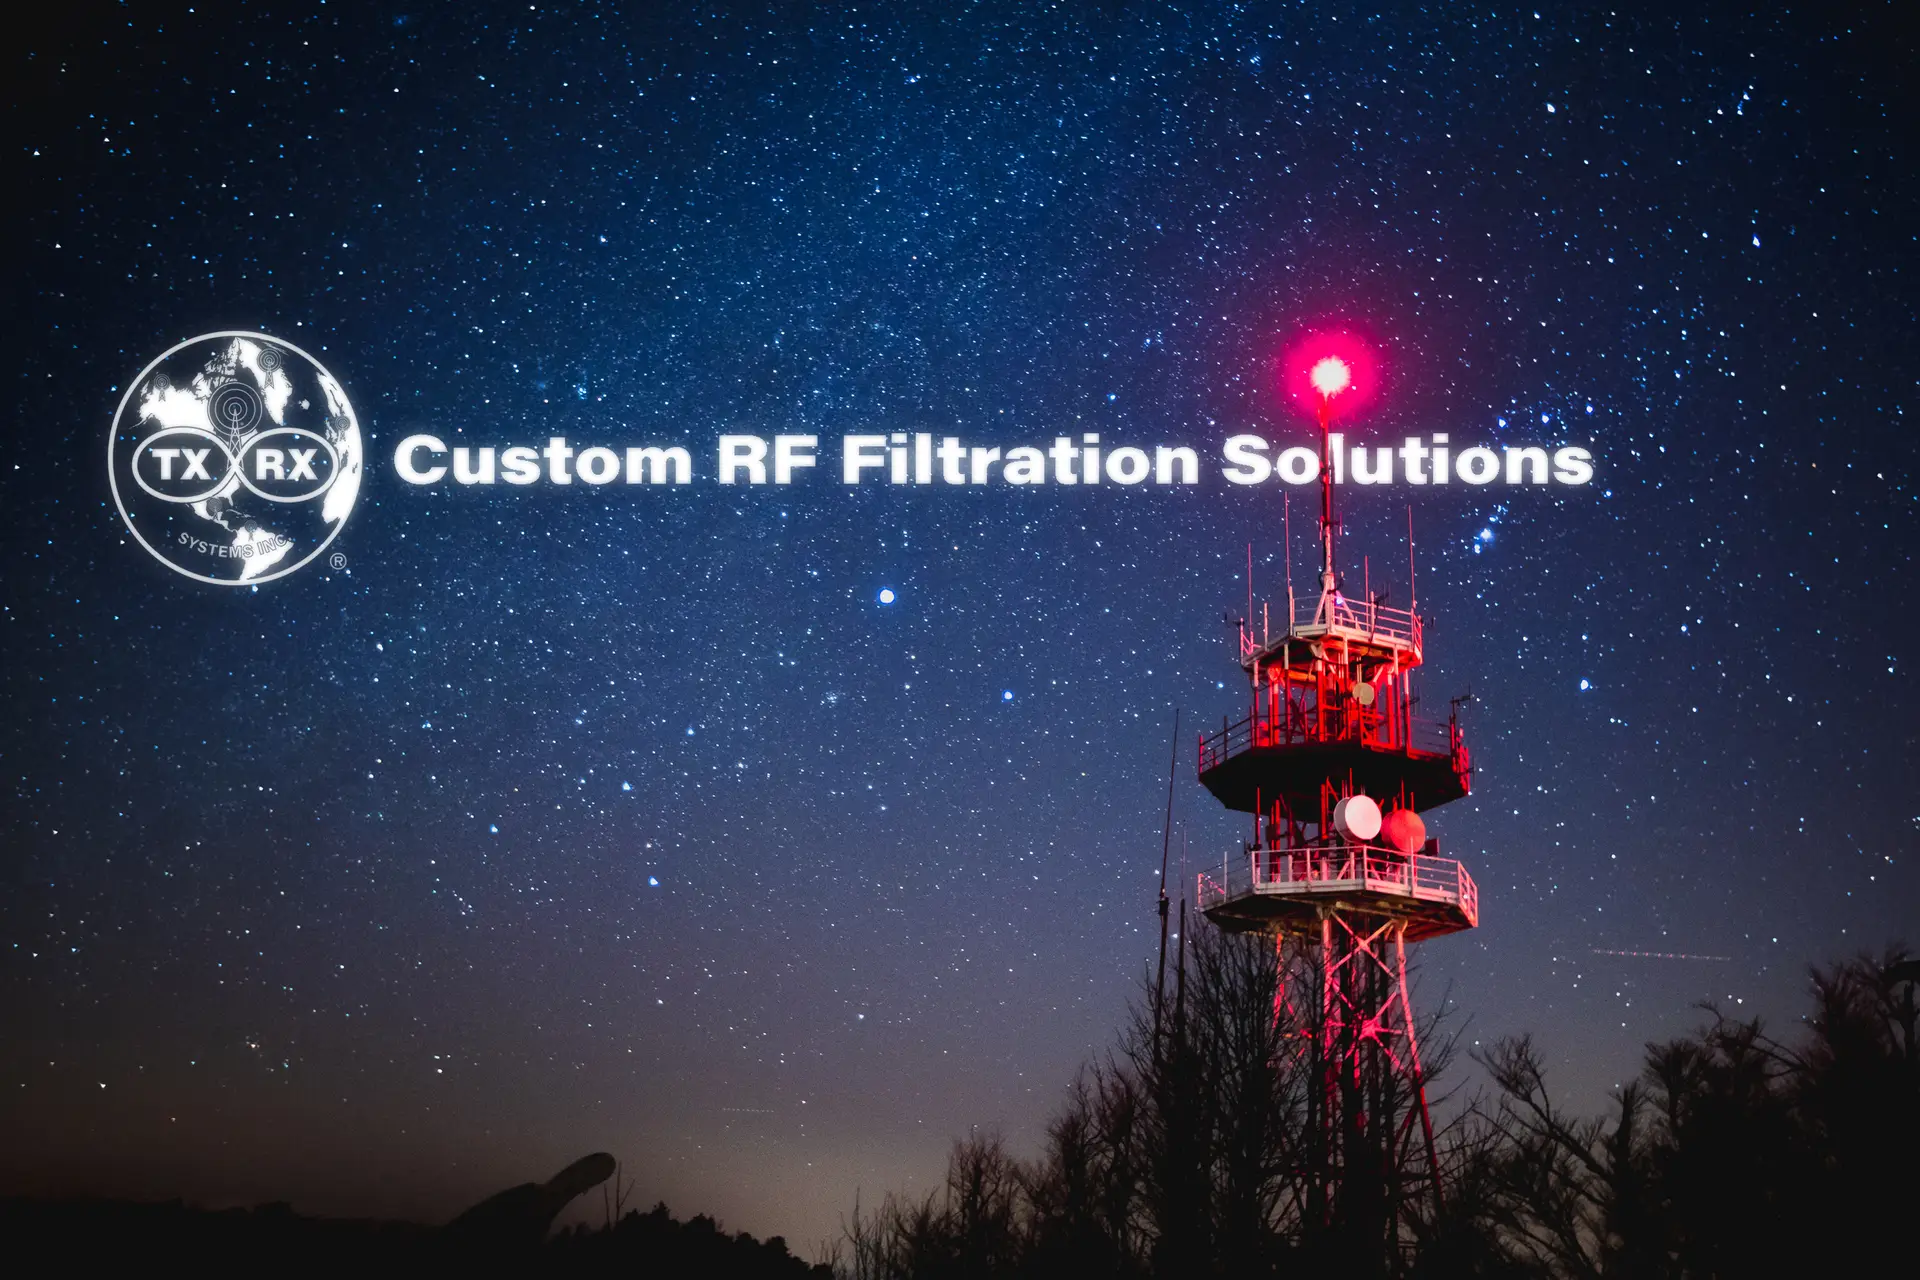 Custom Filtration Solutions by RF Tech Manufacturer TX RX Systems